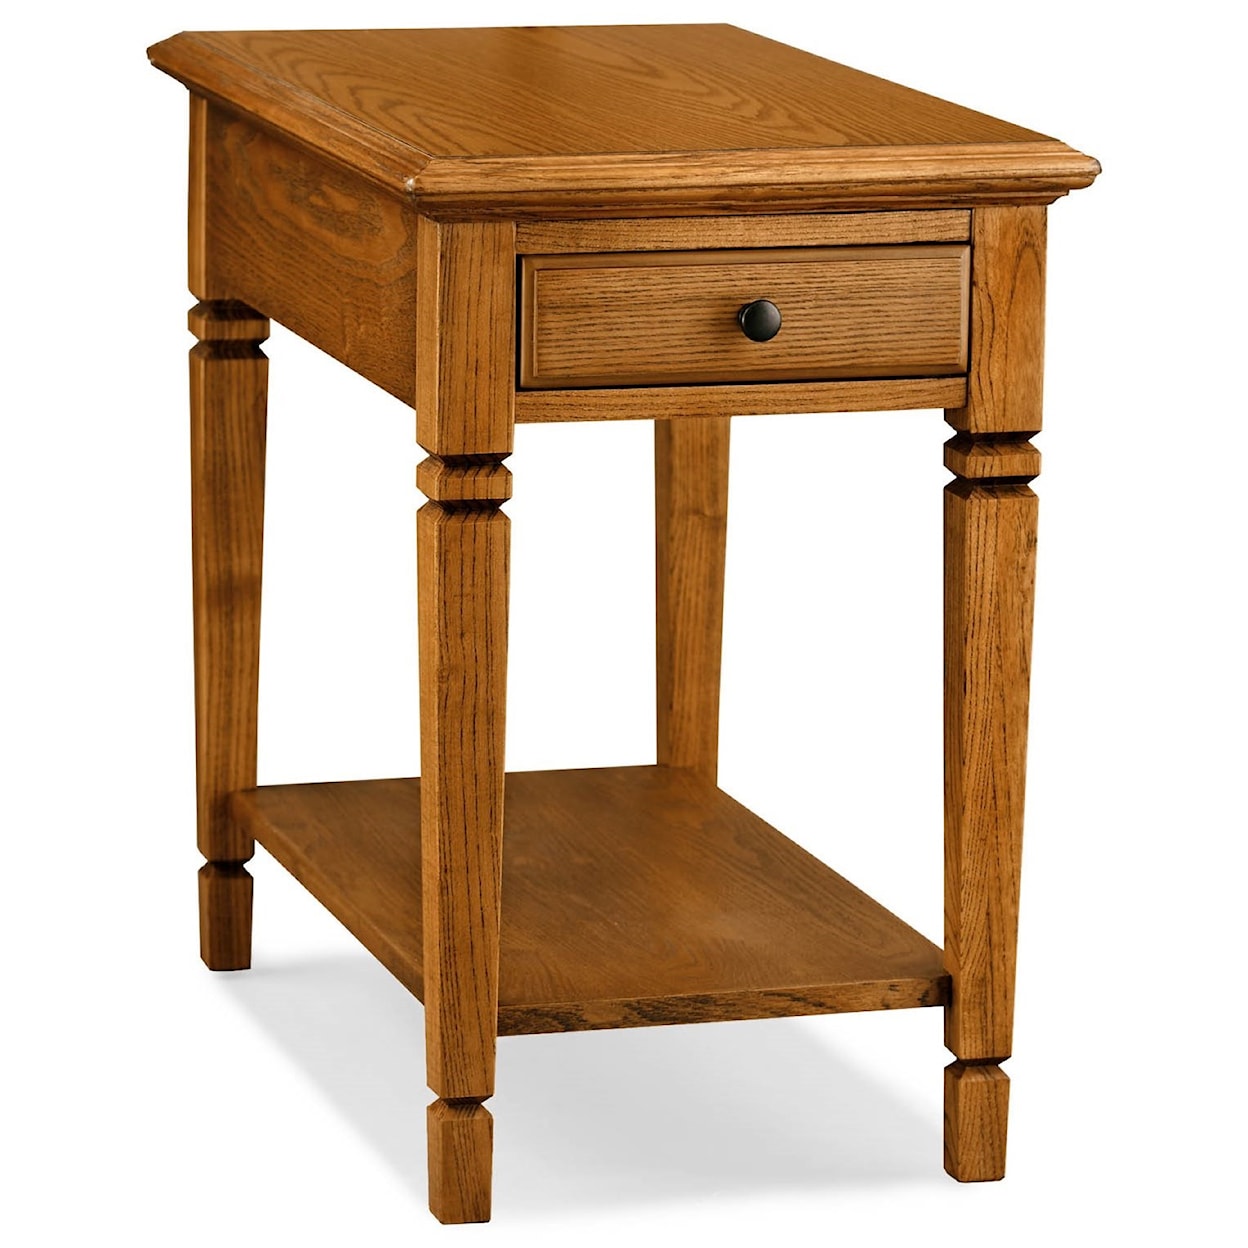 Peters Revington WestEnd Chairside Table